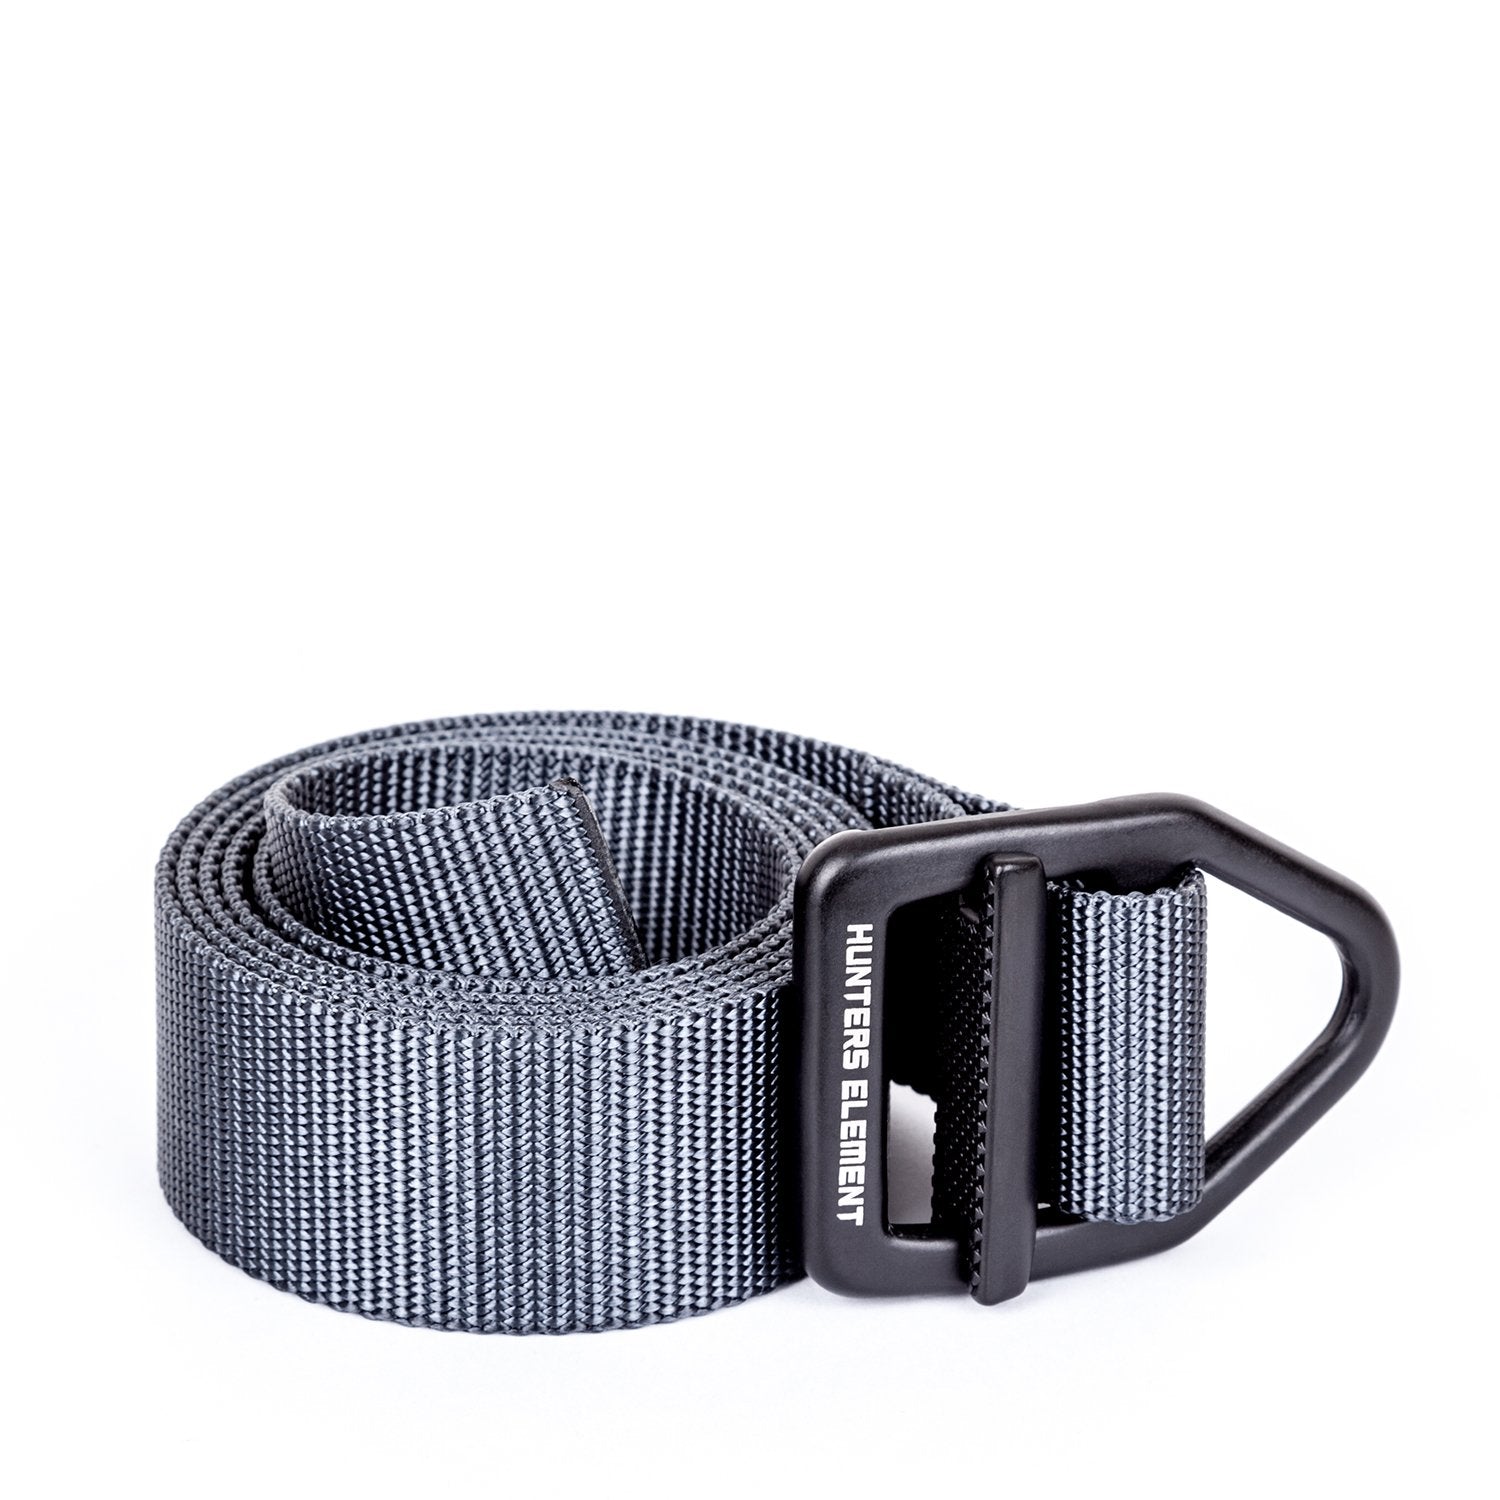 Hunters Element Torque Belt - Grey -  - Mansfield Hunting & Fishing - Products to prepare for Corona Virus